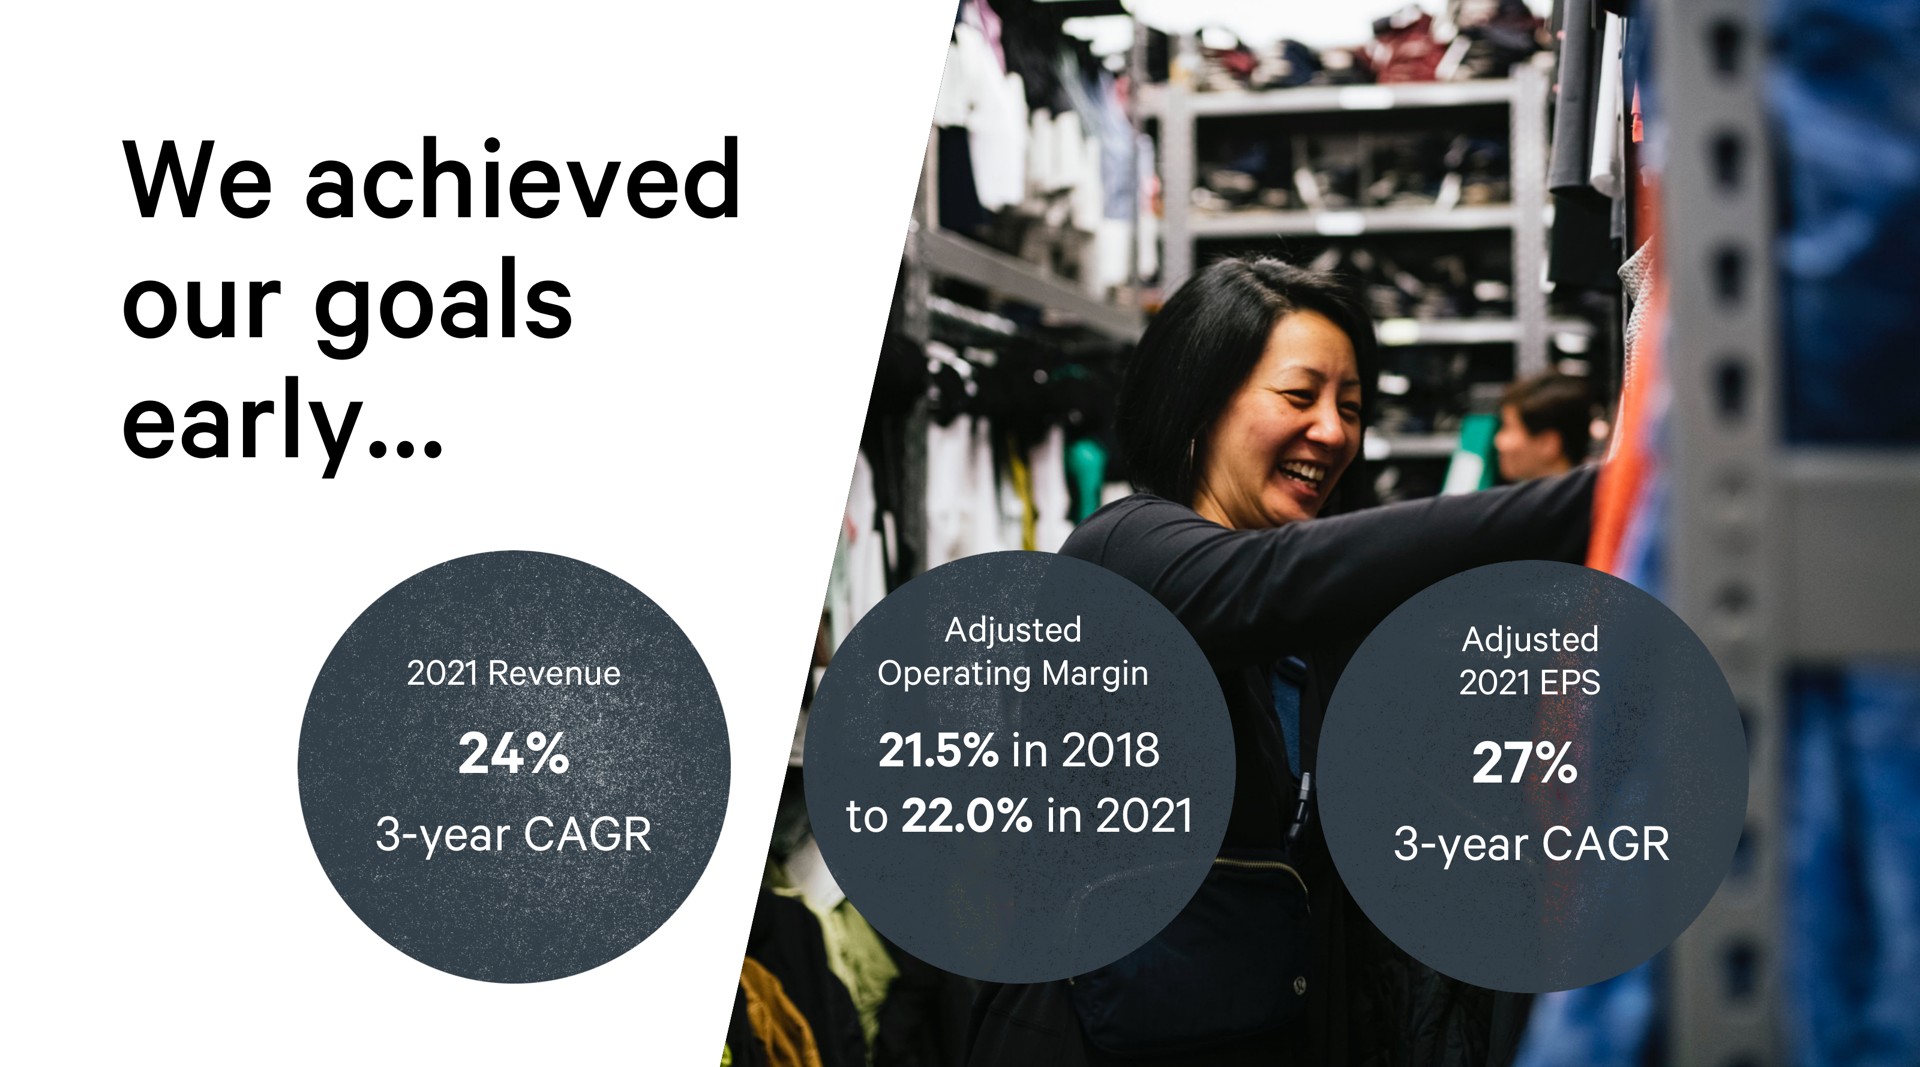 we achieved our goals early revenue year adjusted operating margin in to in adjusted year a | Lululemon